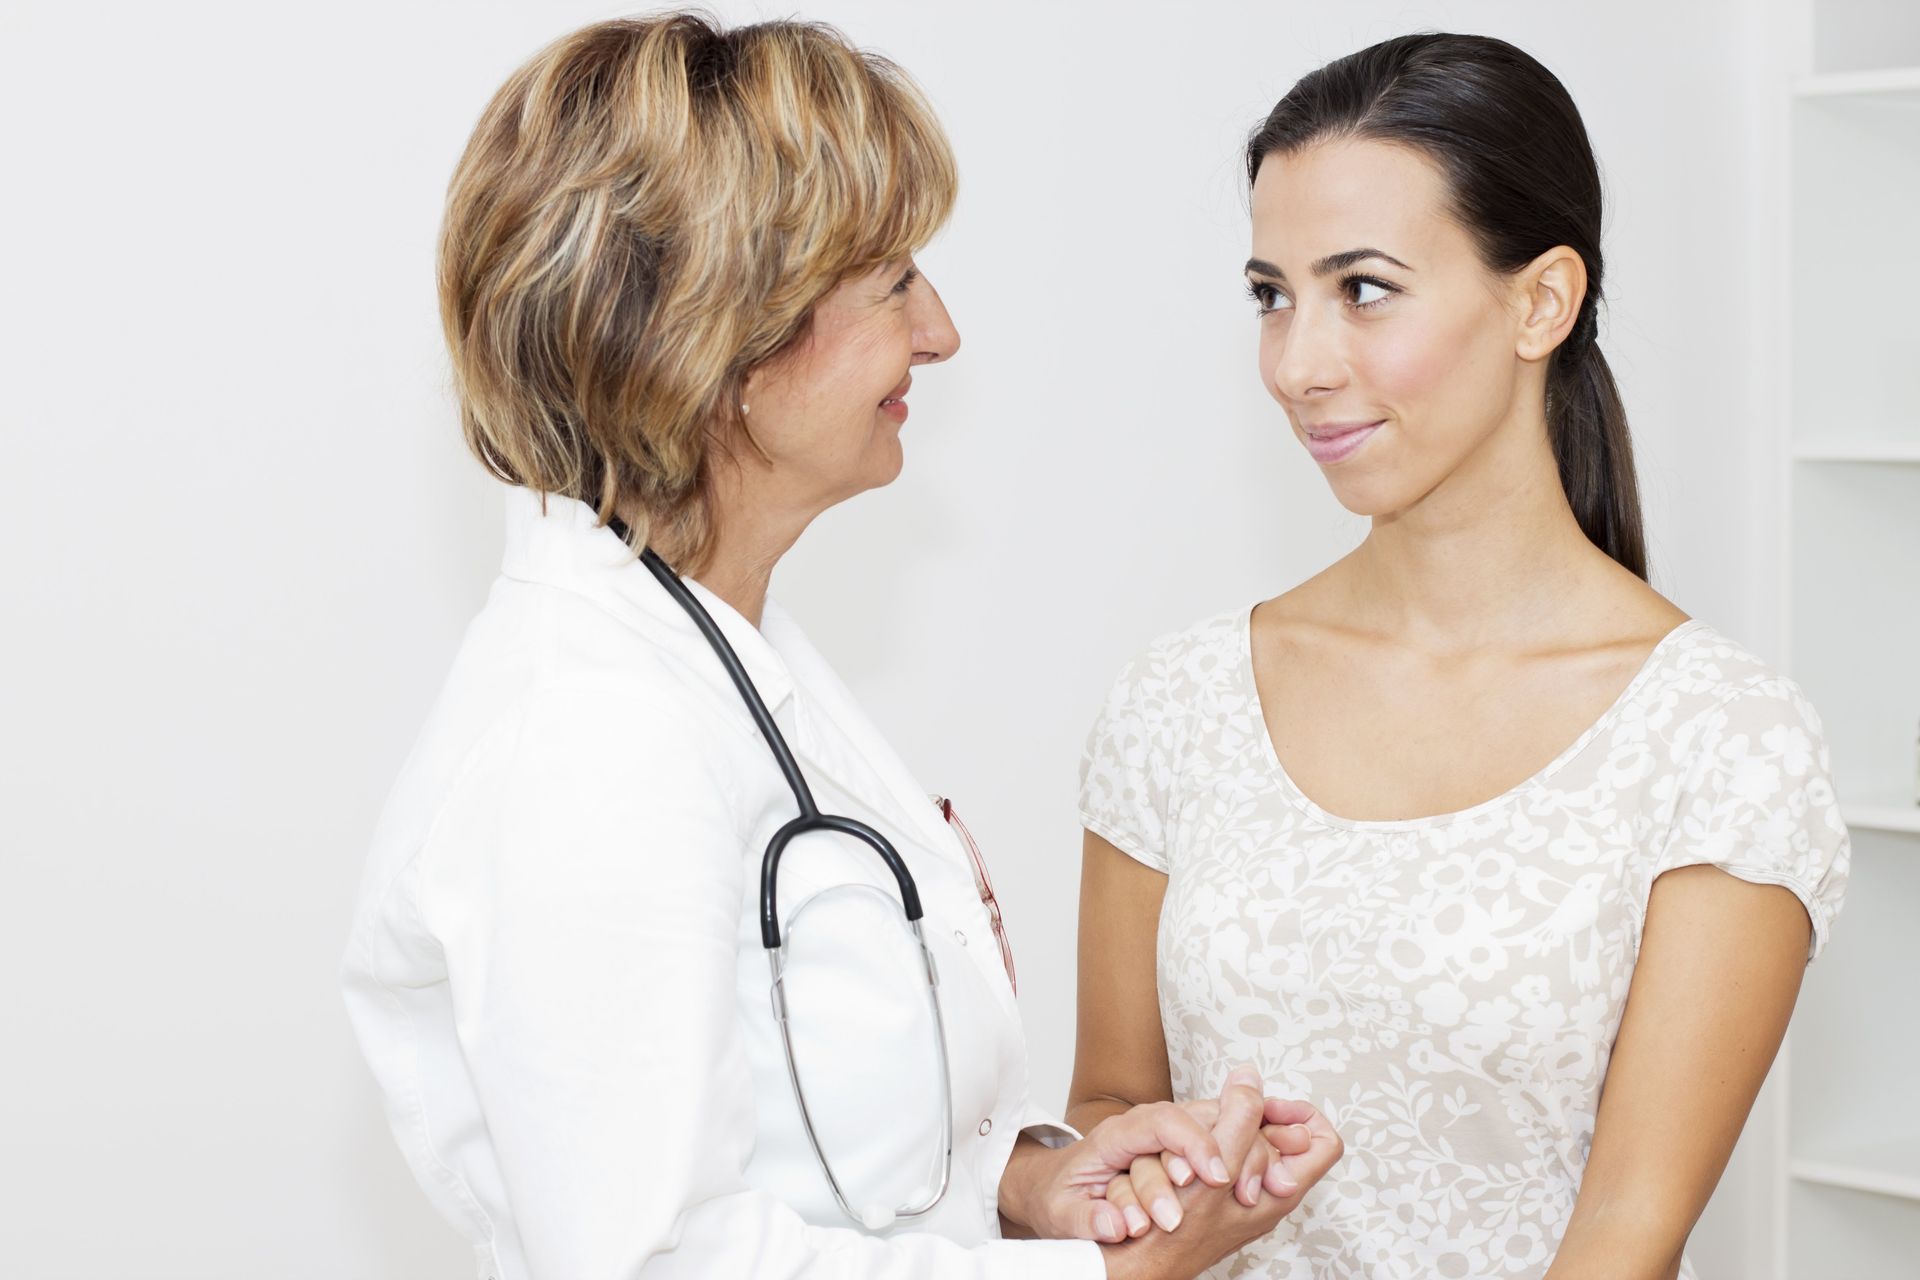 Patient Consulting with Female Physician